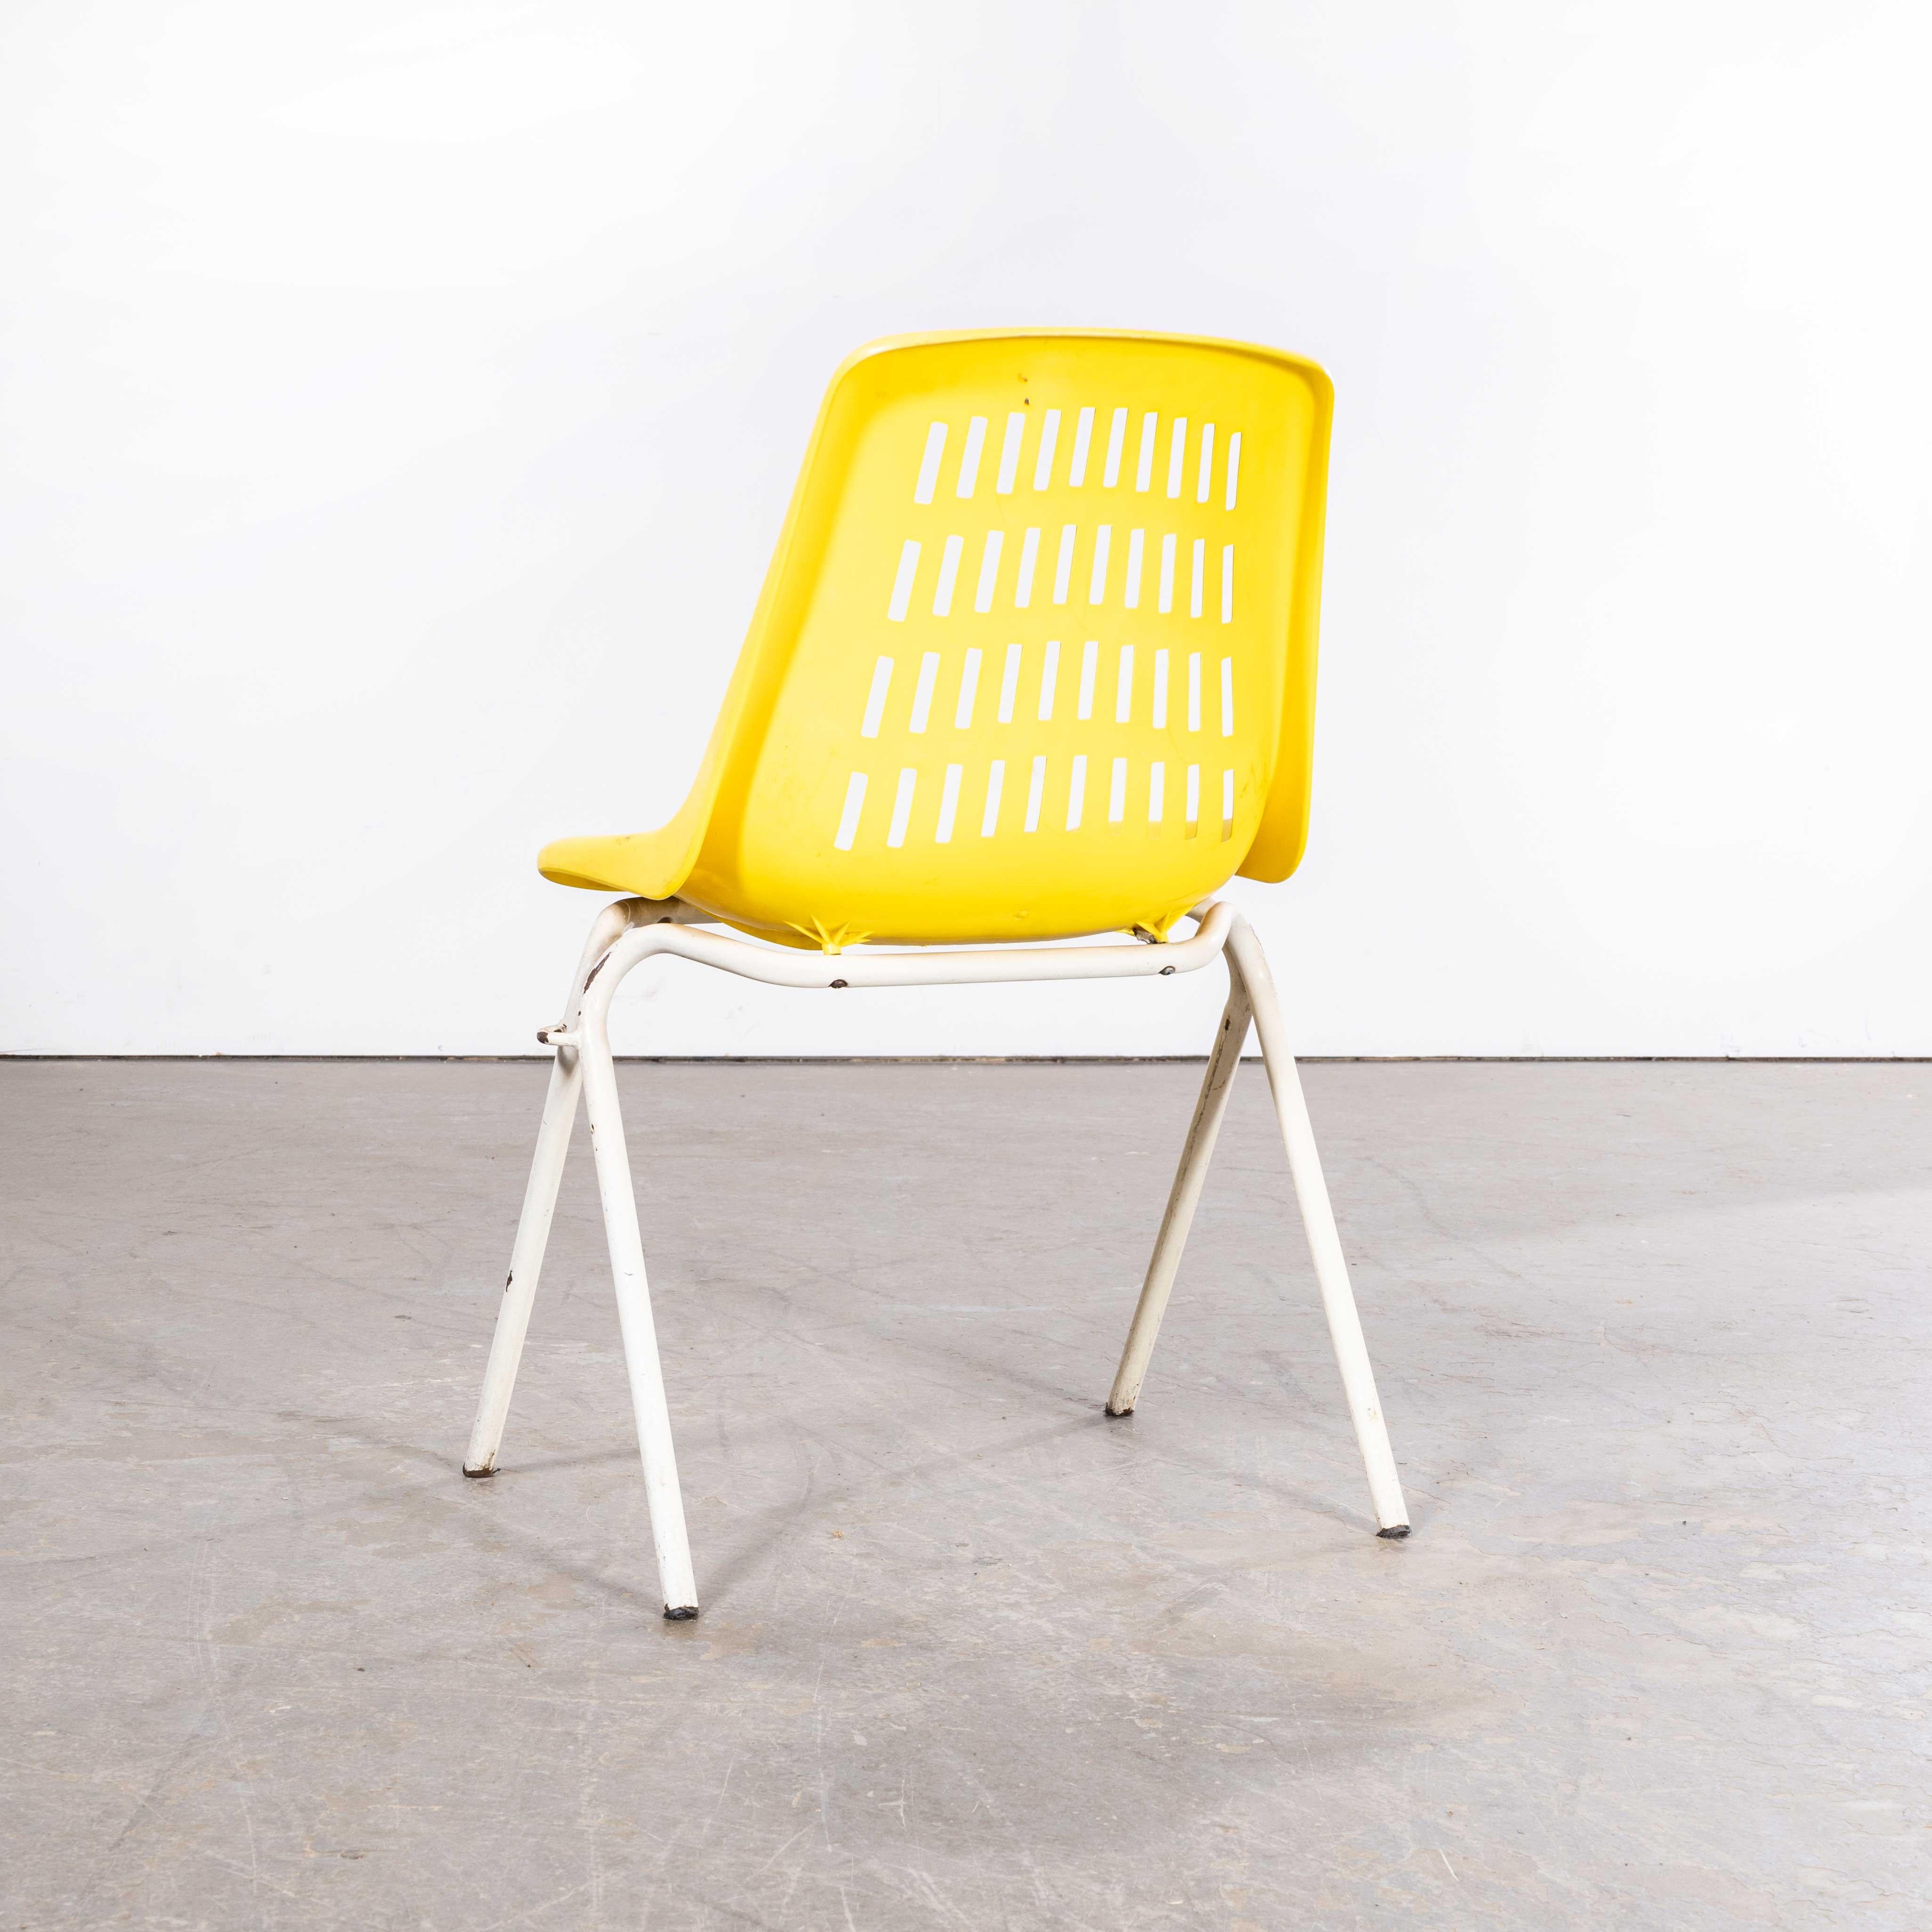 1970’s Classic Yellow Stacking Italian Bar Dining Chairs – Good Quantities Available
1970’s Classic Yellow Stacking Italian Bar Dining Chairs – Good Quantities Available. You will see these chairs in cafes and bars all over Italy. A practical